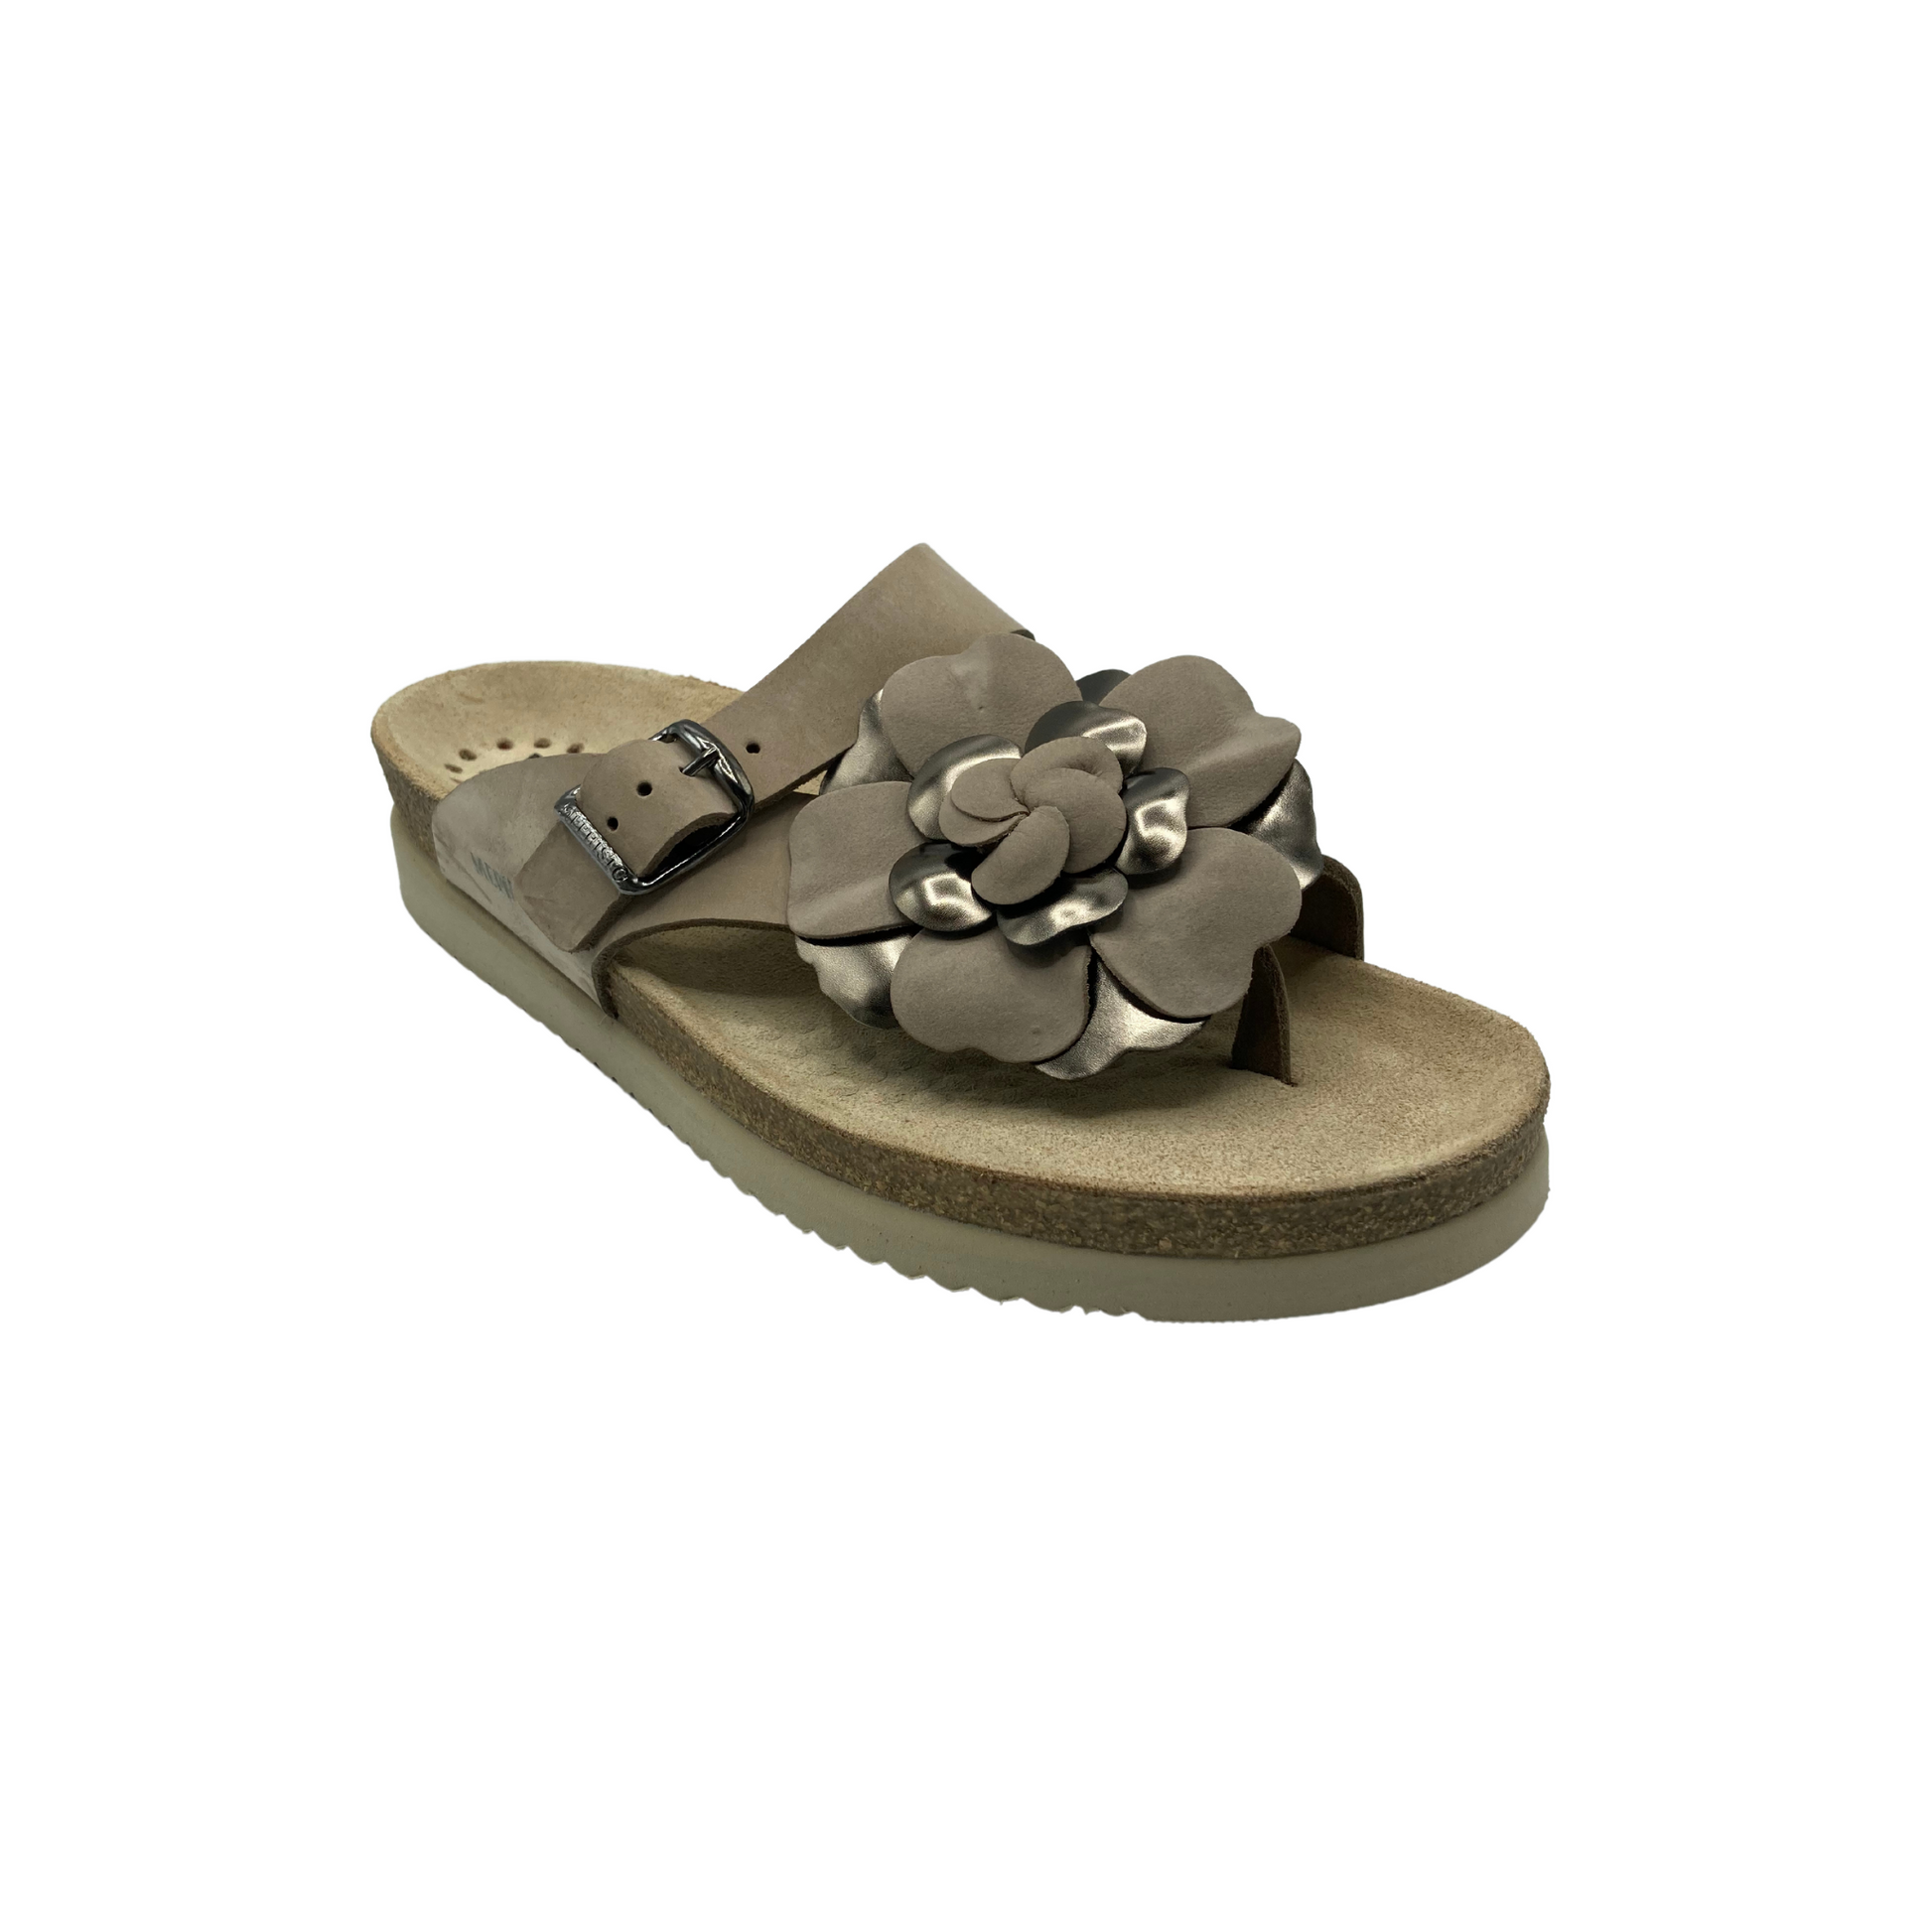  The taupe Mephisto Helen Flower sandal offers undeniable style.